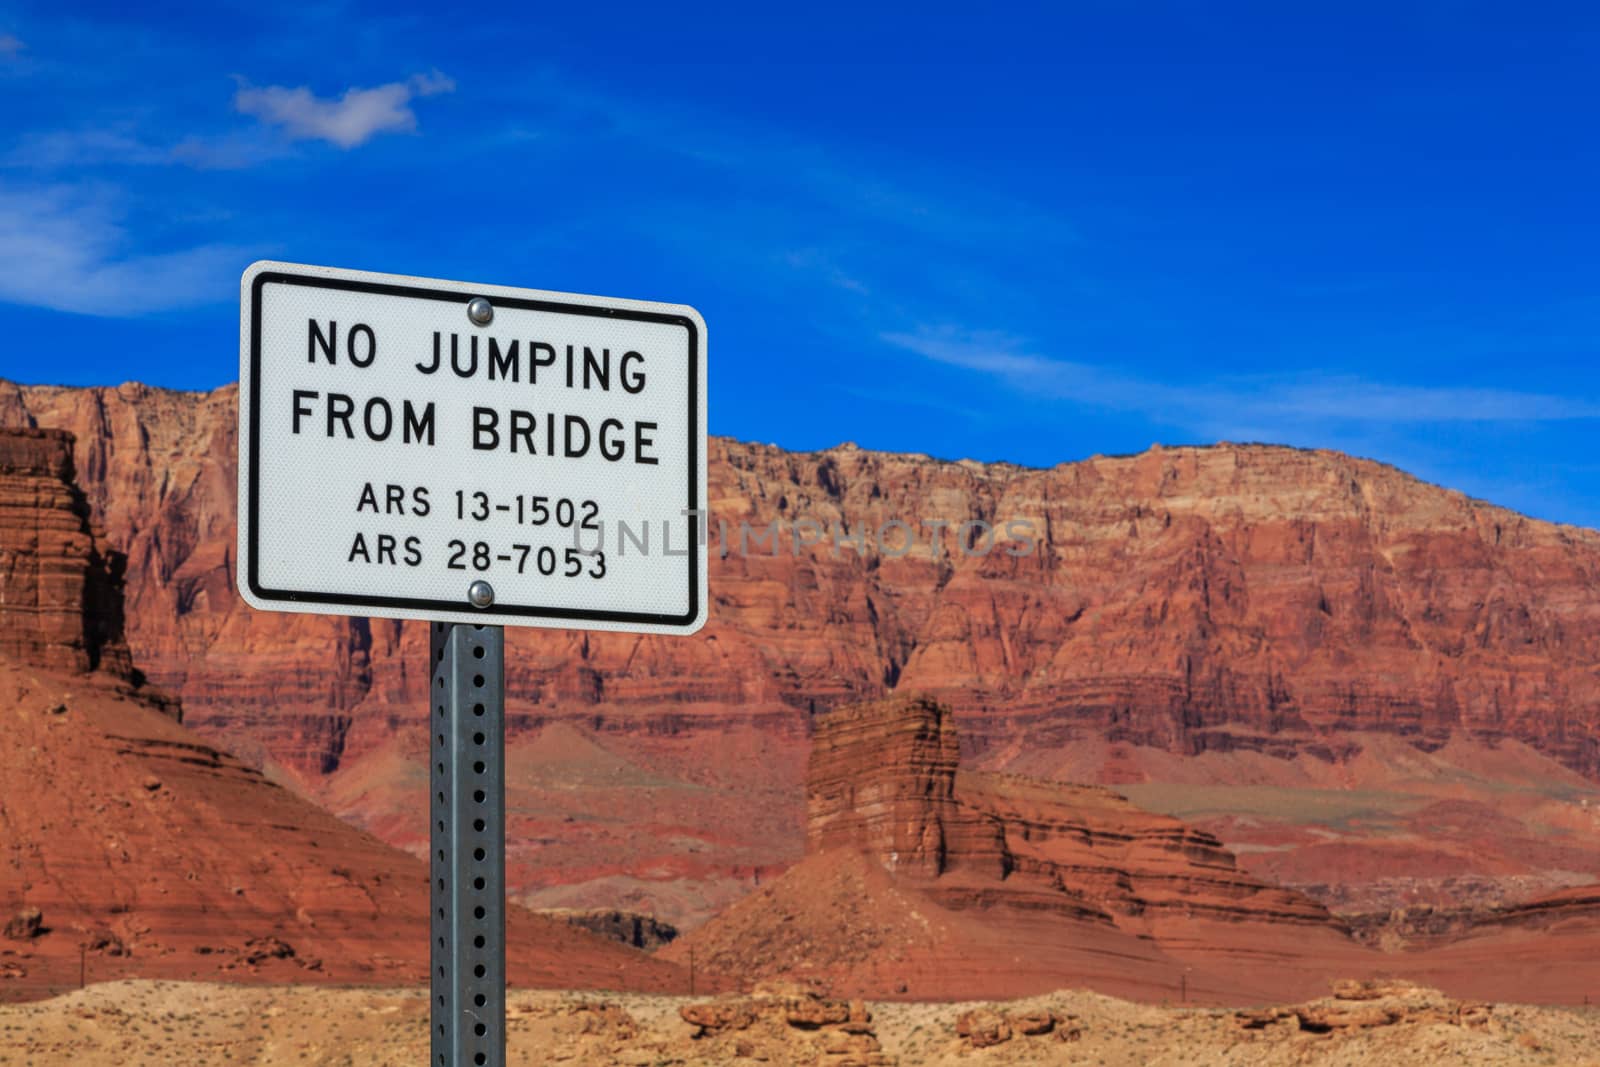 Signage with jumping restrictions on a foot bridge, Arizona, US